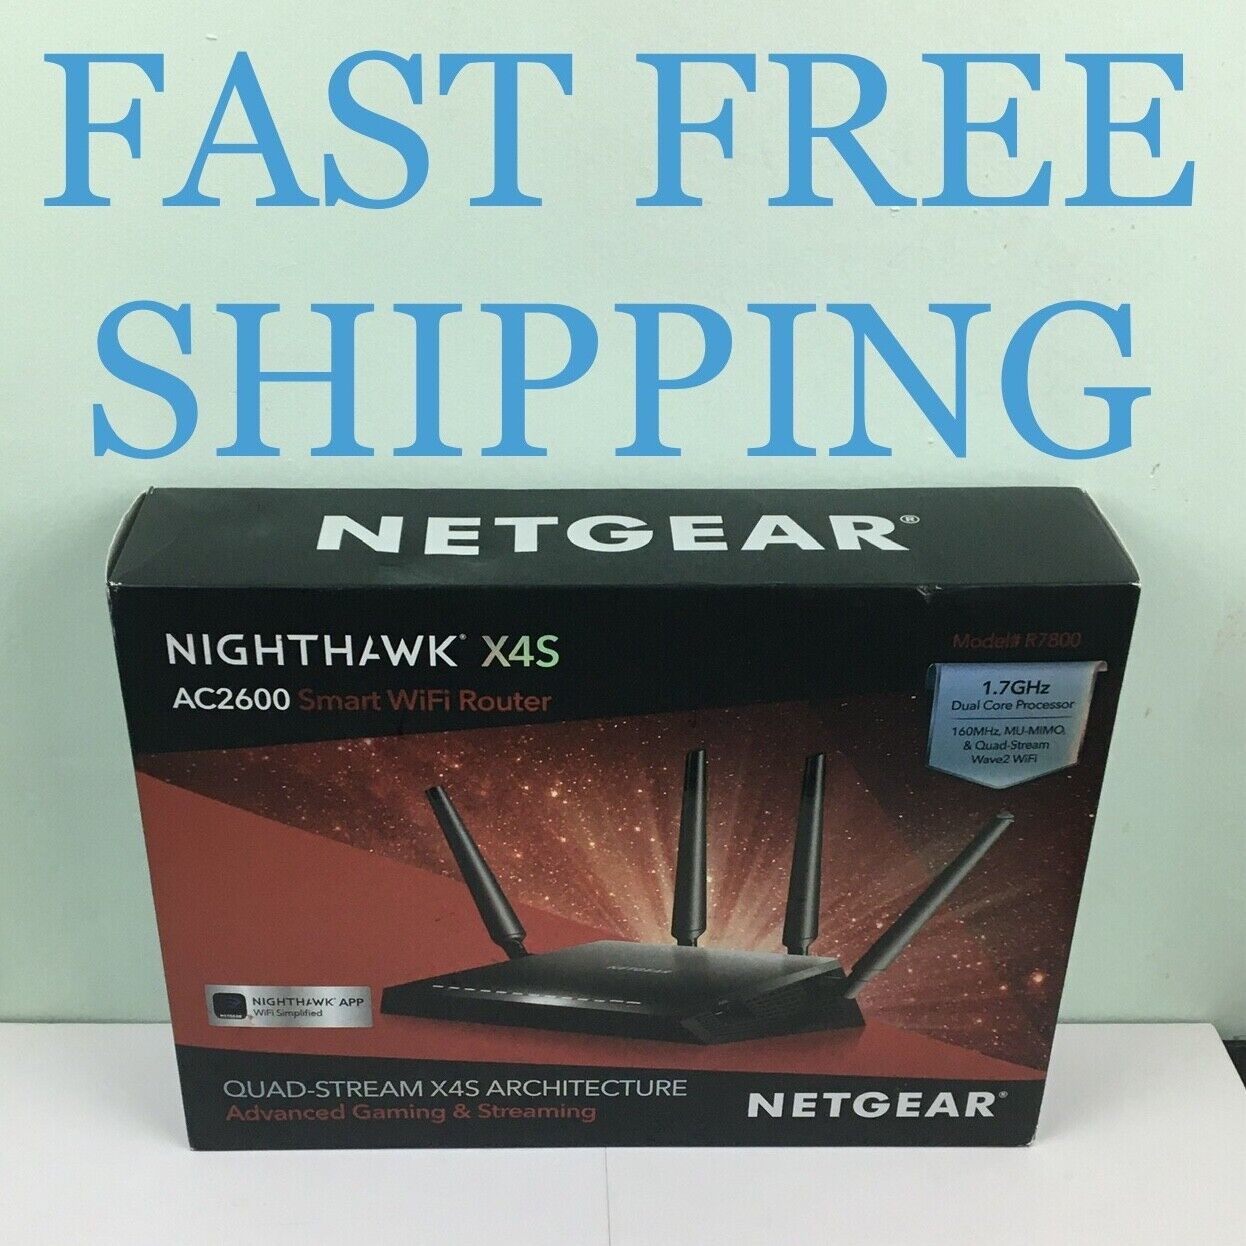 NETGEAR R7800-100NAS Nighthawk 2600Mbps X4S Smart WiFi Router support 45 Devices